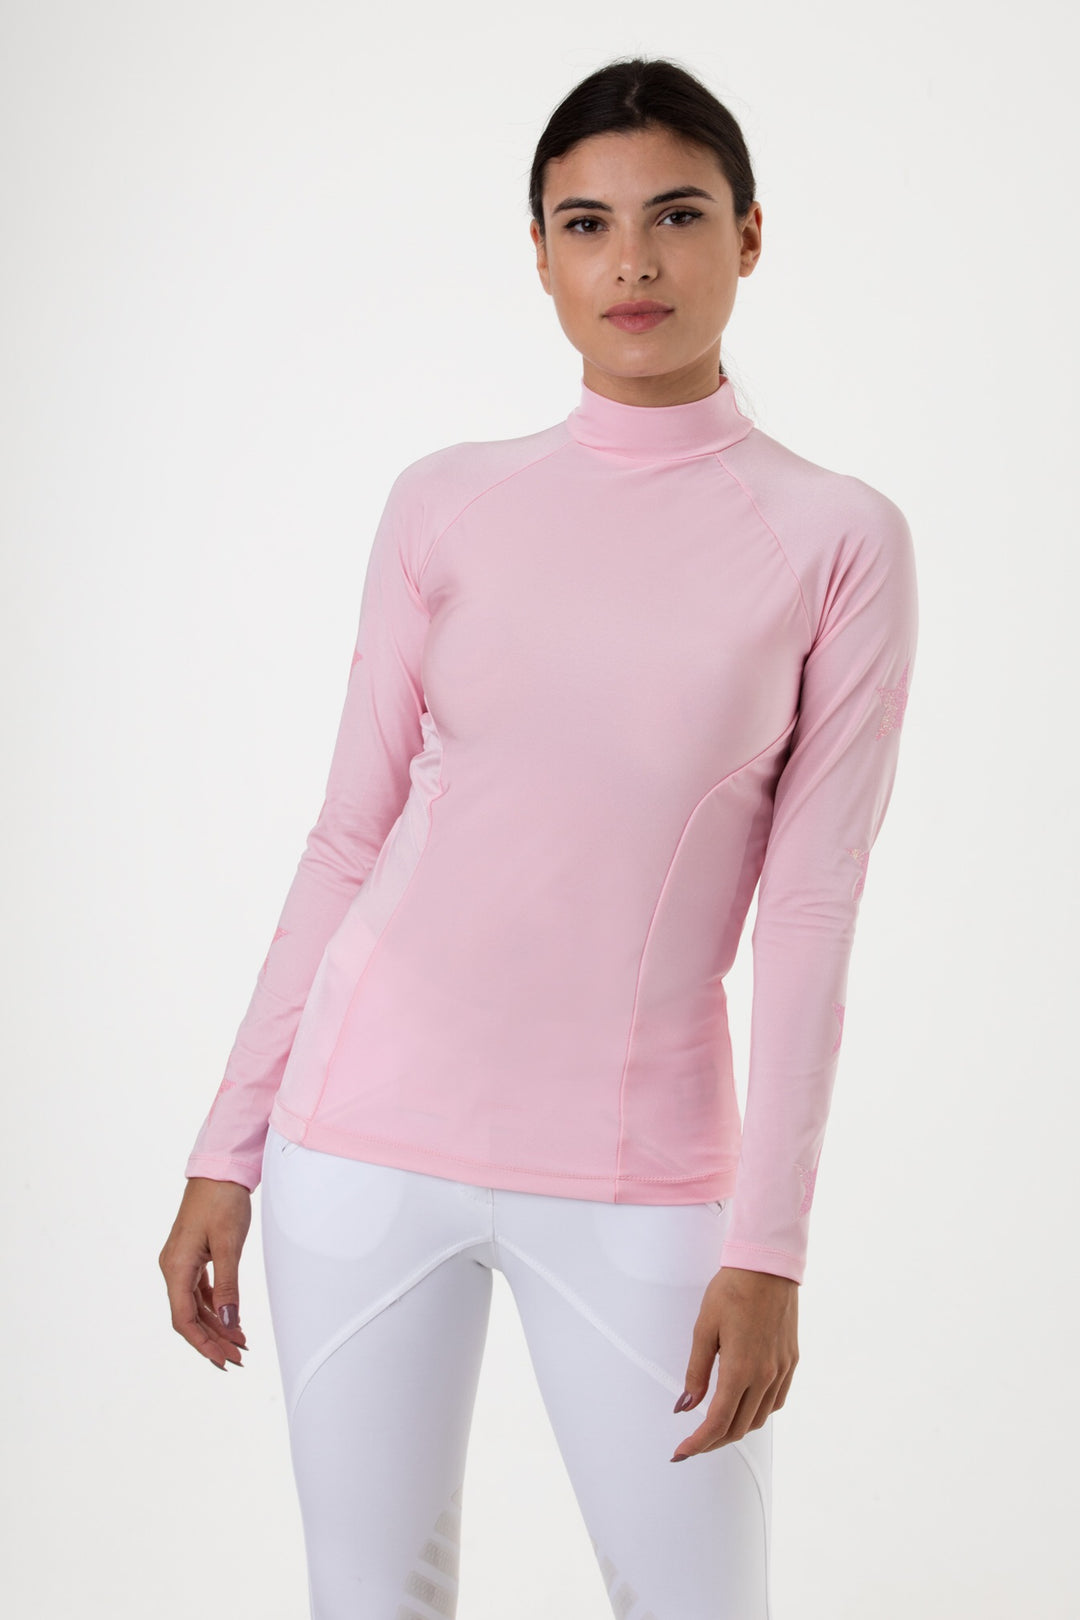 Baby Pink understated Equestrian Base layer 